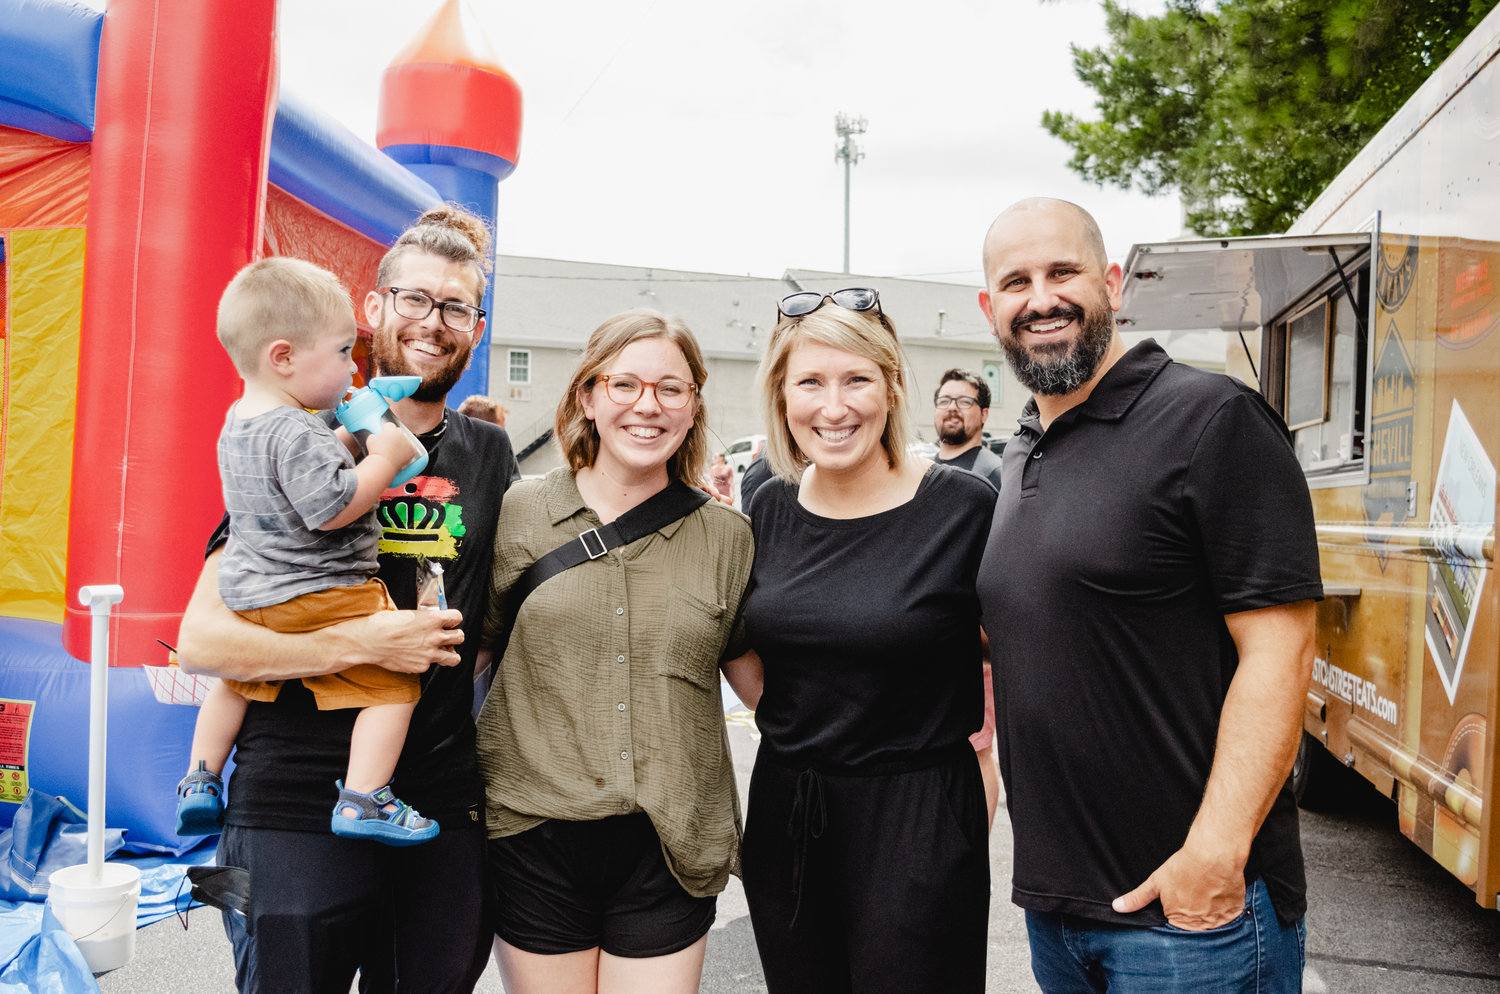 Brandon and Kristen Nichols with Andrew and Kimberly Bradford, and their son Isaac, at a community outreach event. (Photo/Mercy Hill Church)